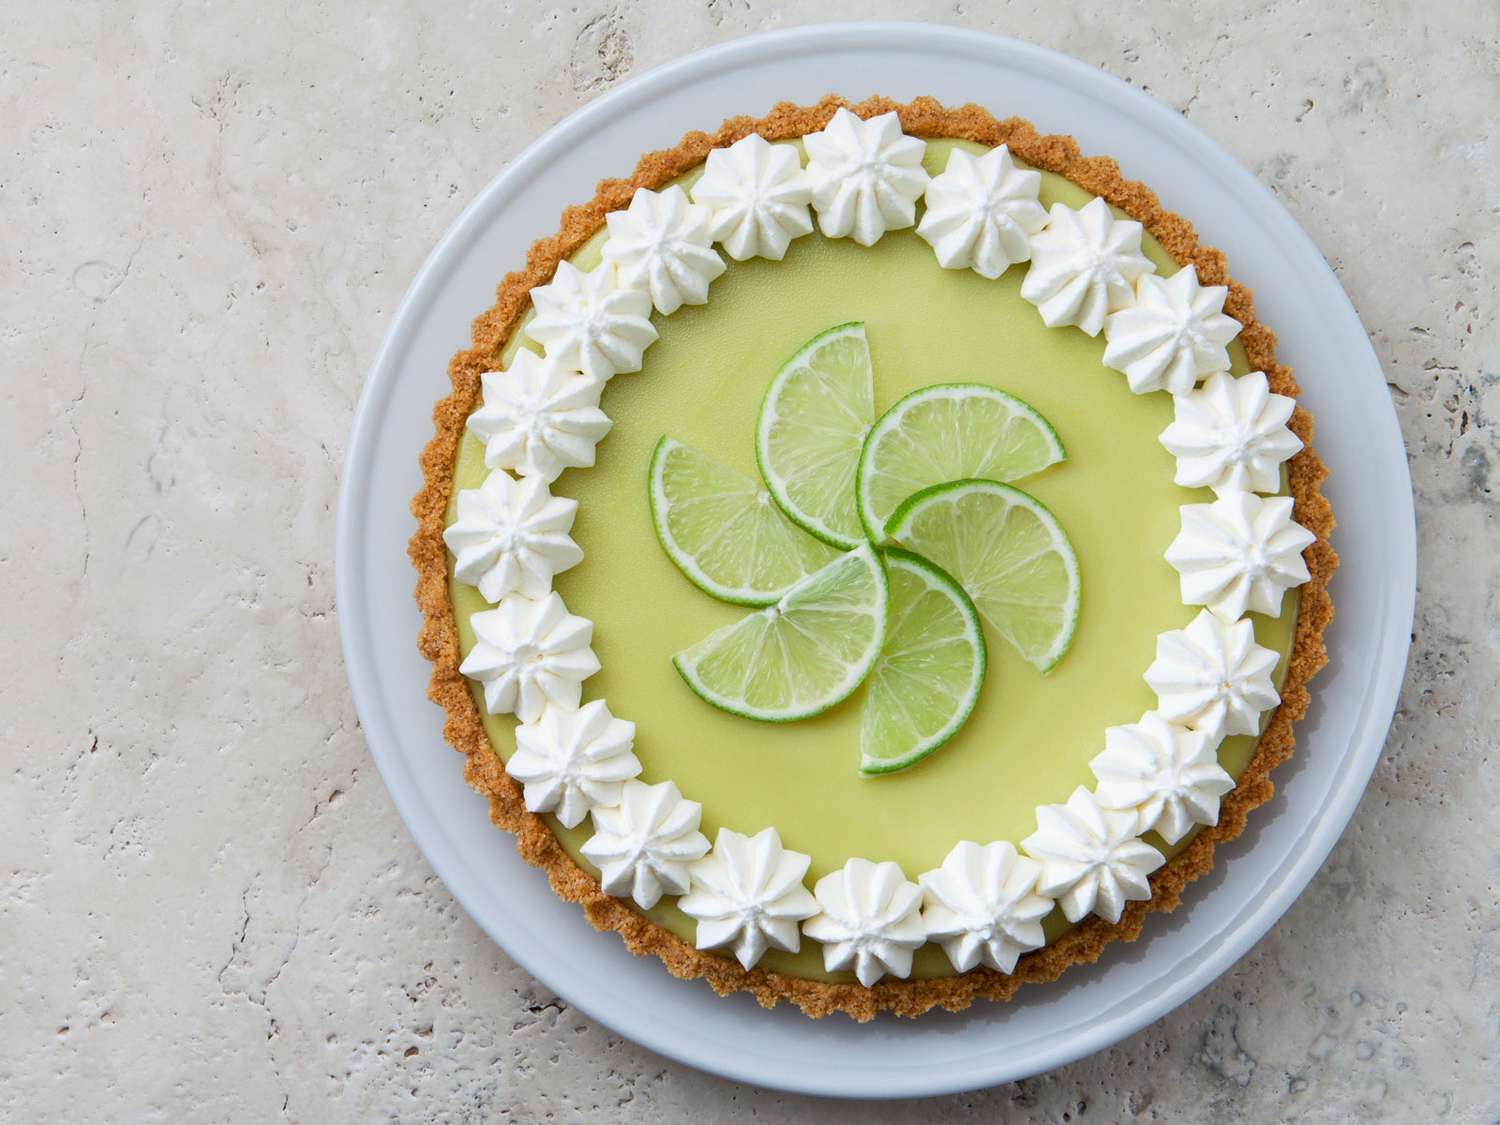 The Quintessential Key Lime Pie: A Summer Delight